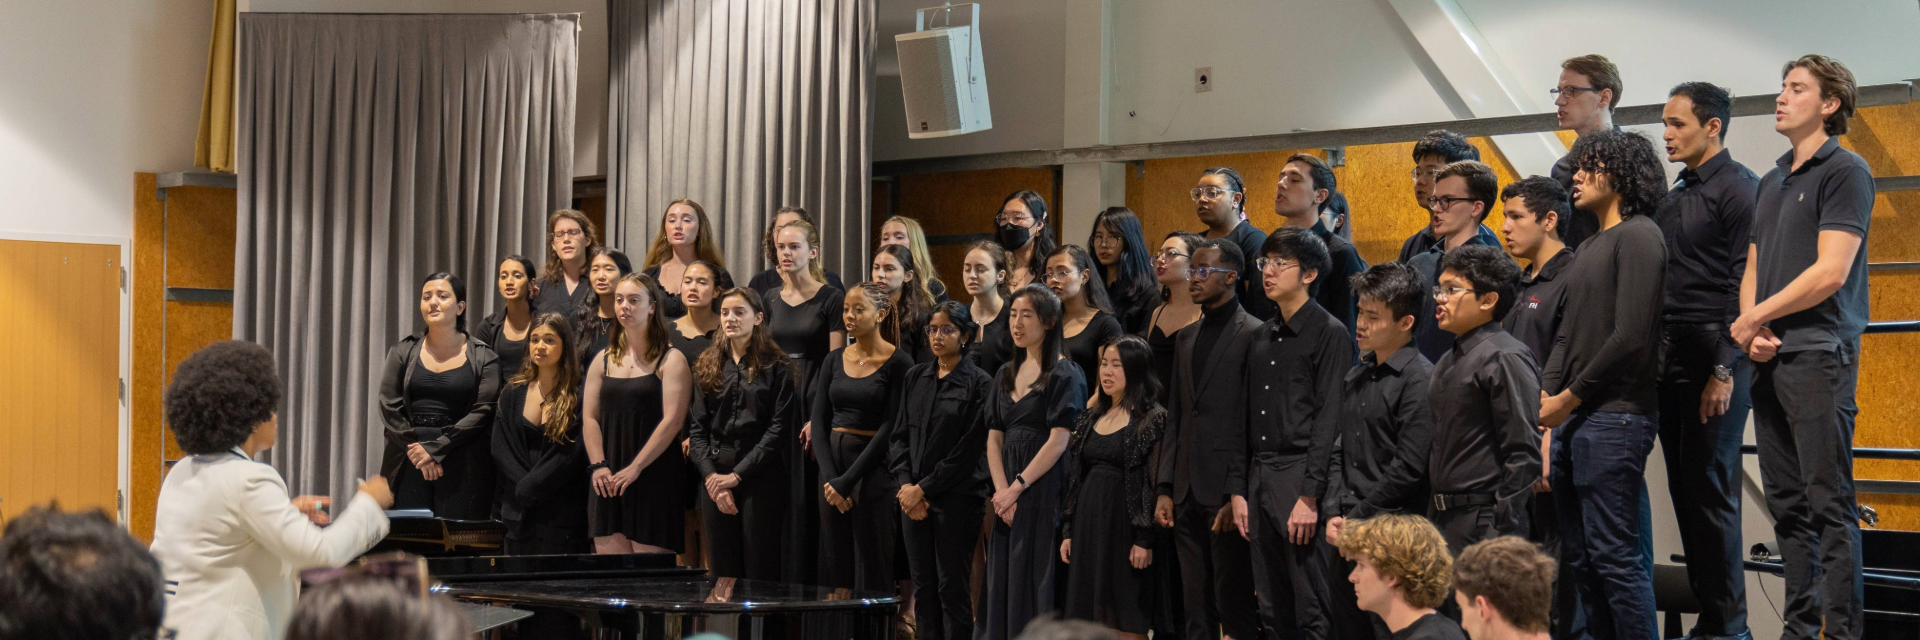 A picture of the chorale